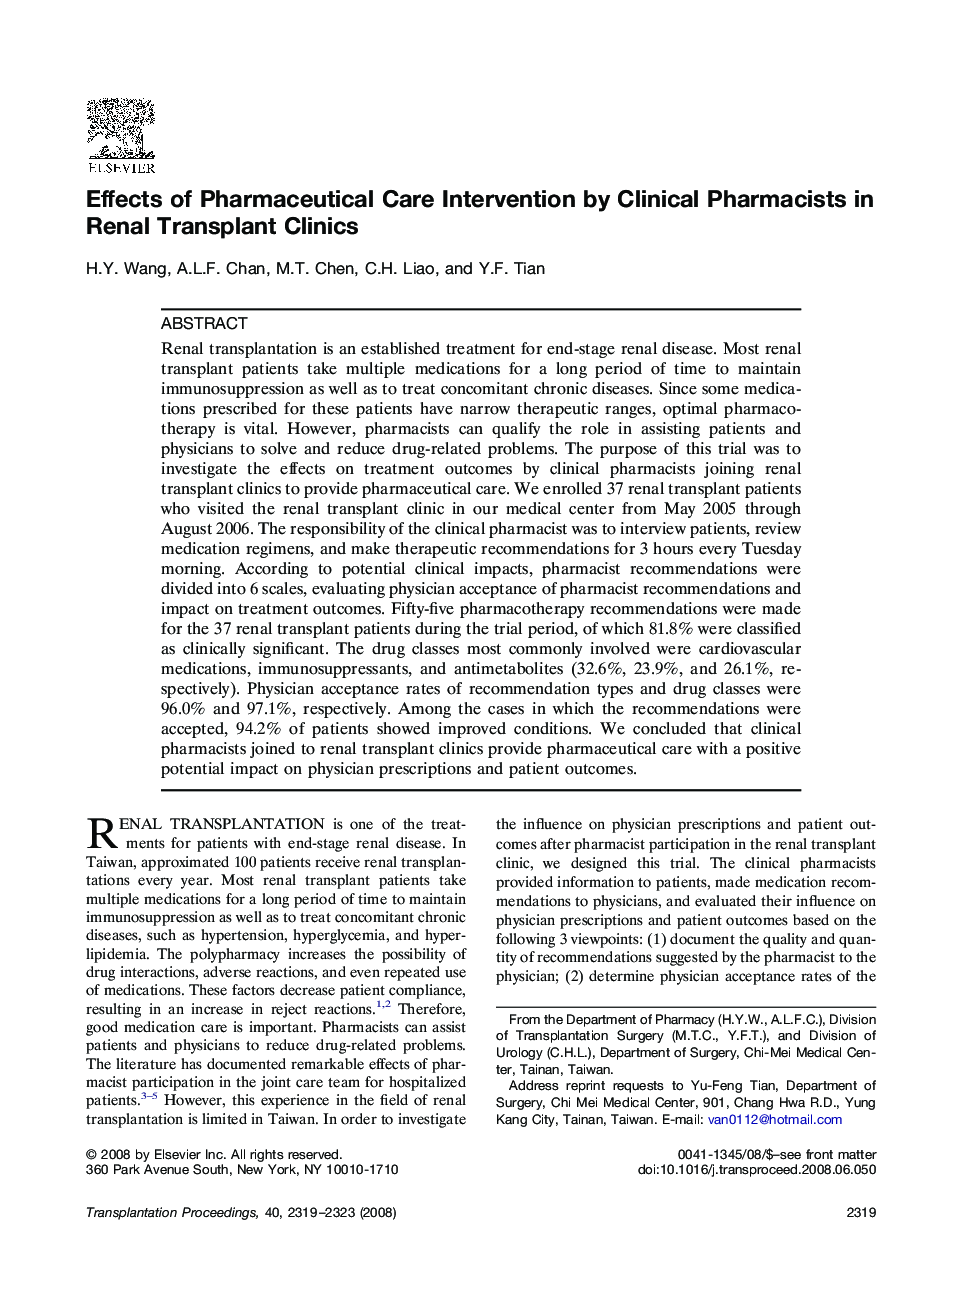 Effects of Pharmaceutical Care Intervention by Clinical Pharmacists in Renal Transplant Clinics